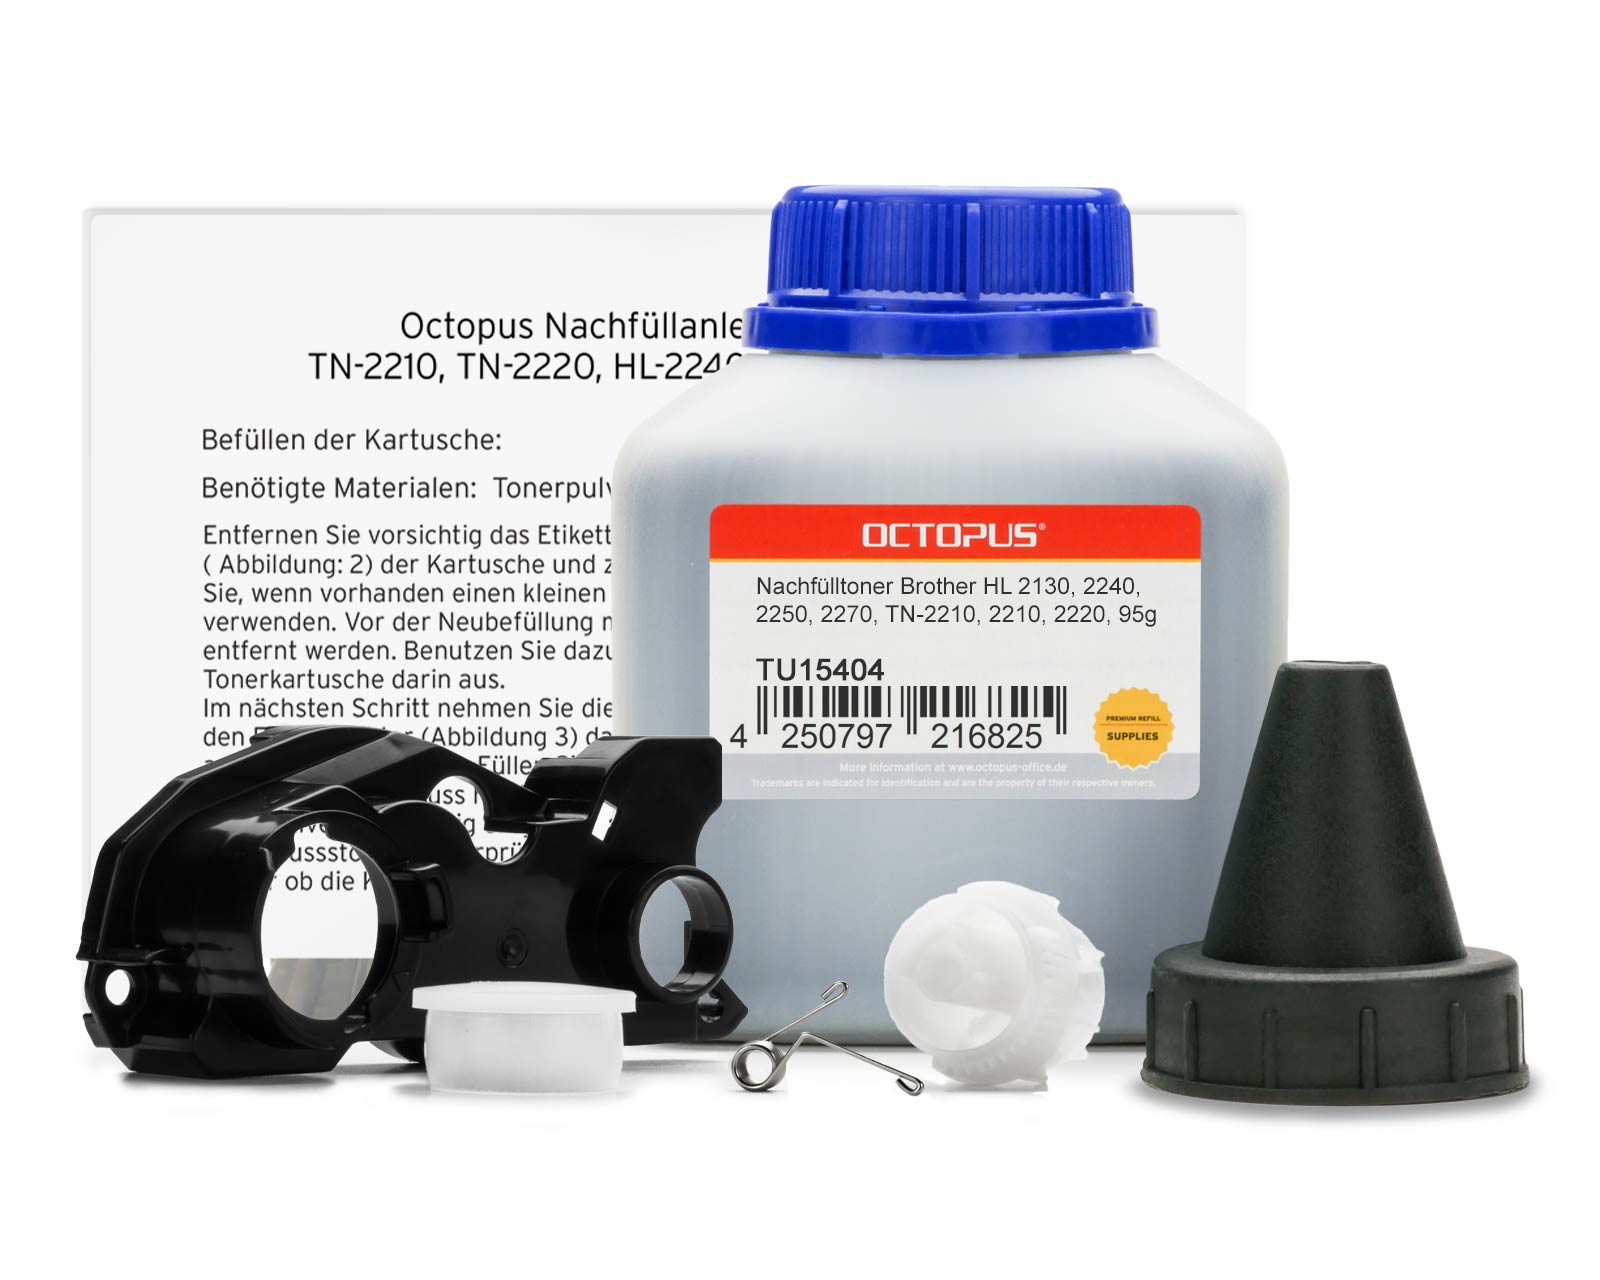 Refill Kit compatible with Brother HL 2130, 2240, 2250, 2270, TN-2010, TN-2210, TN-2220